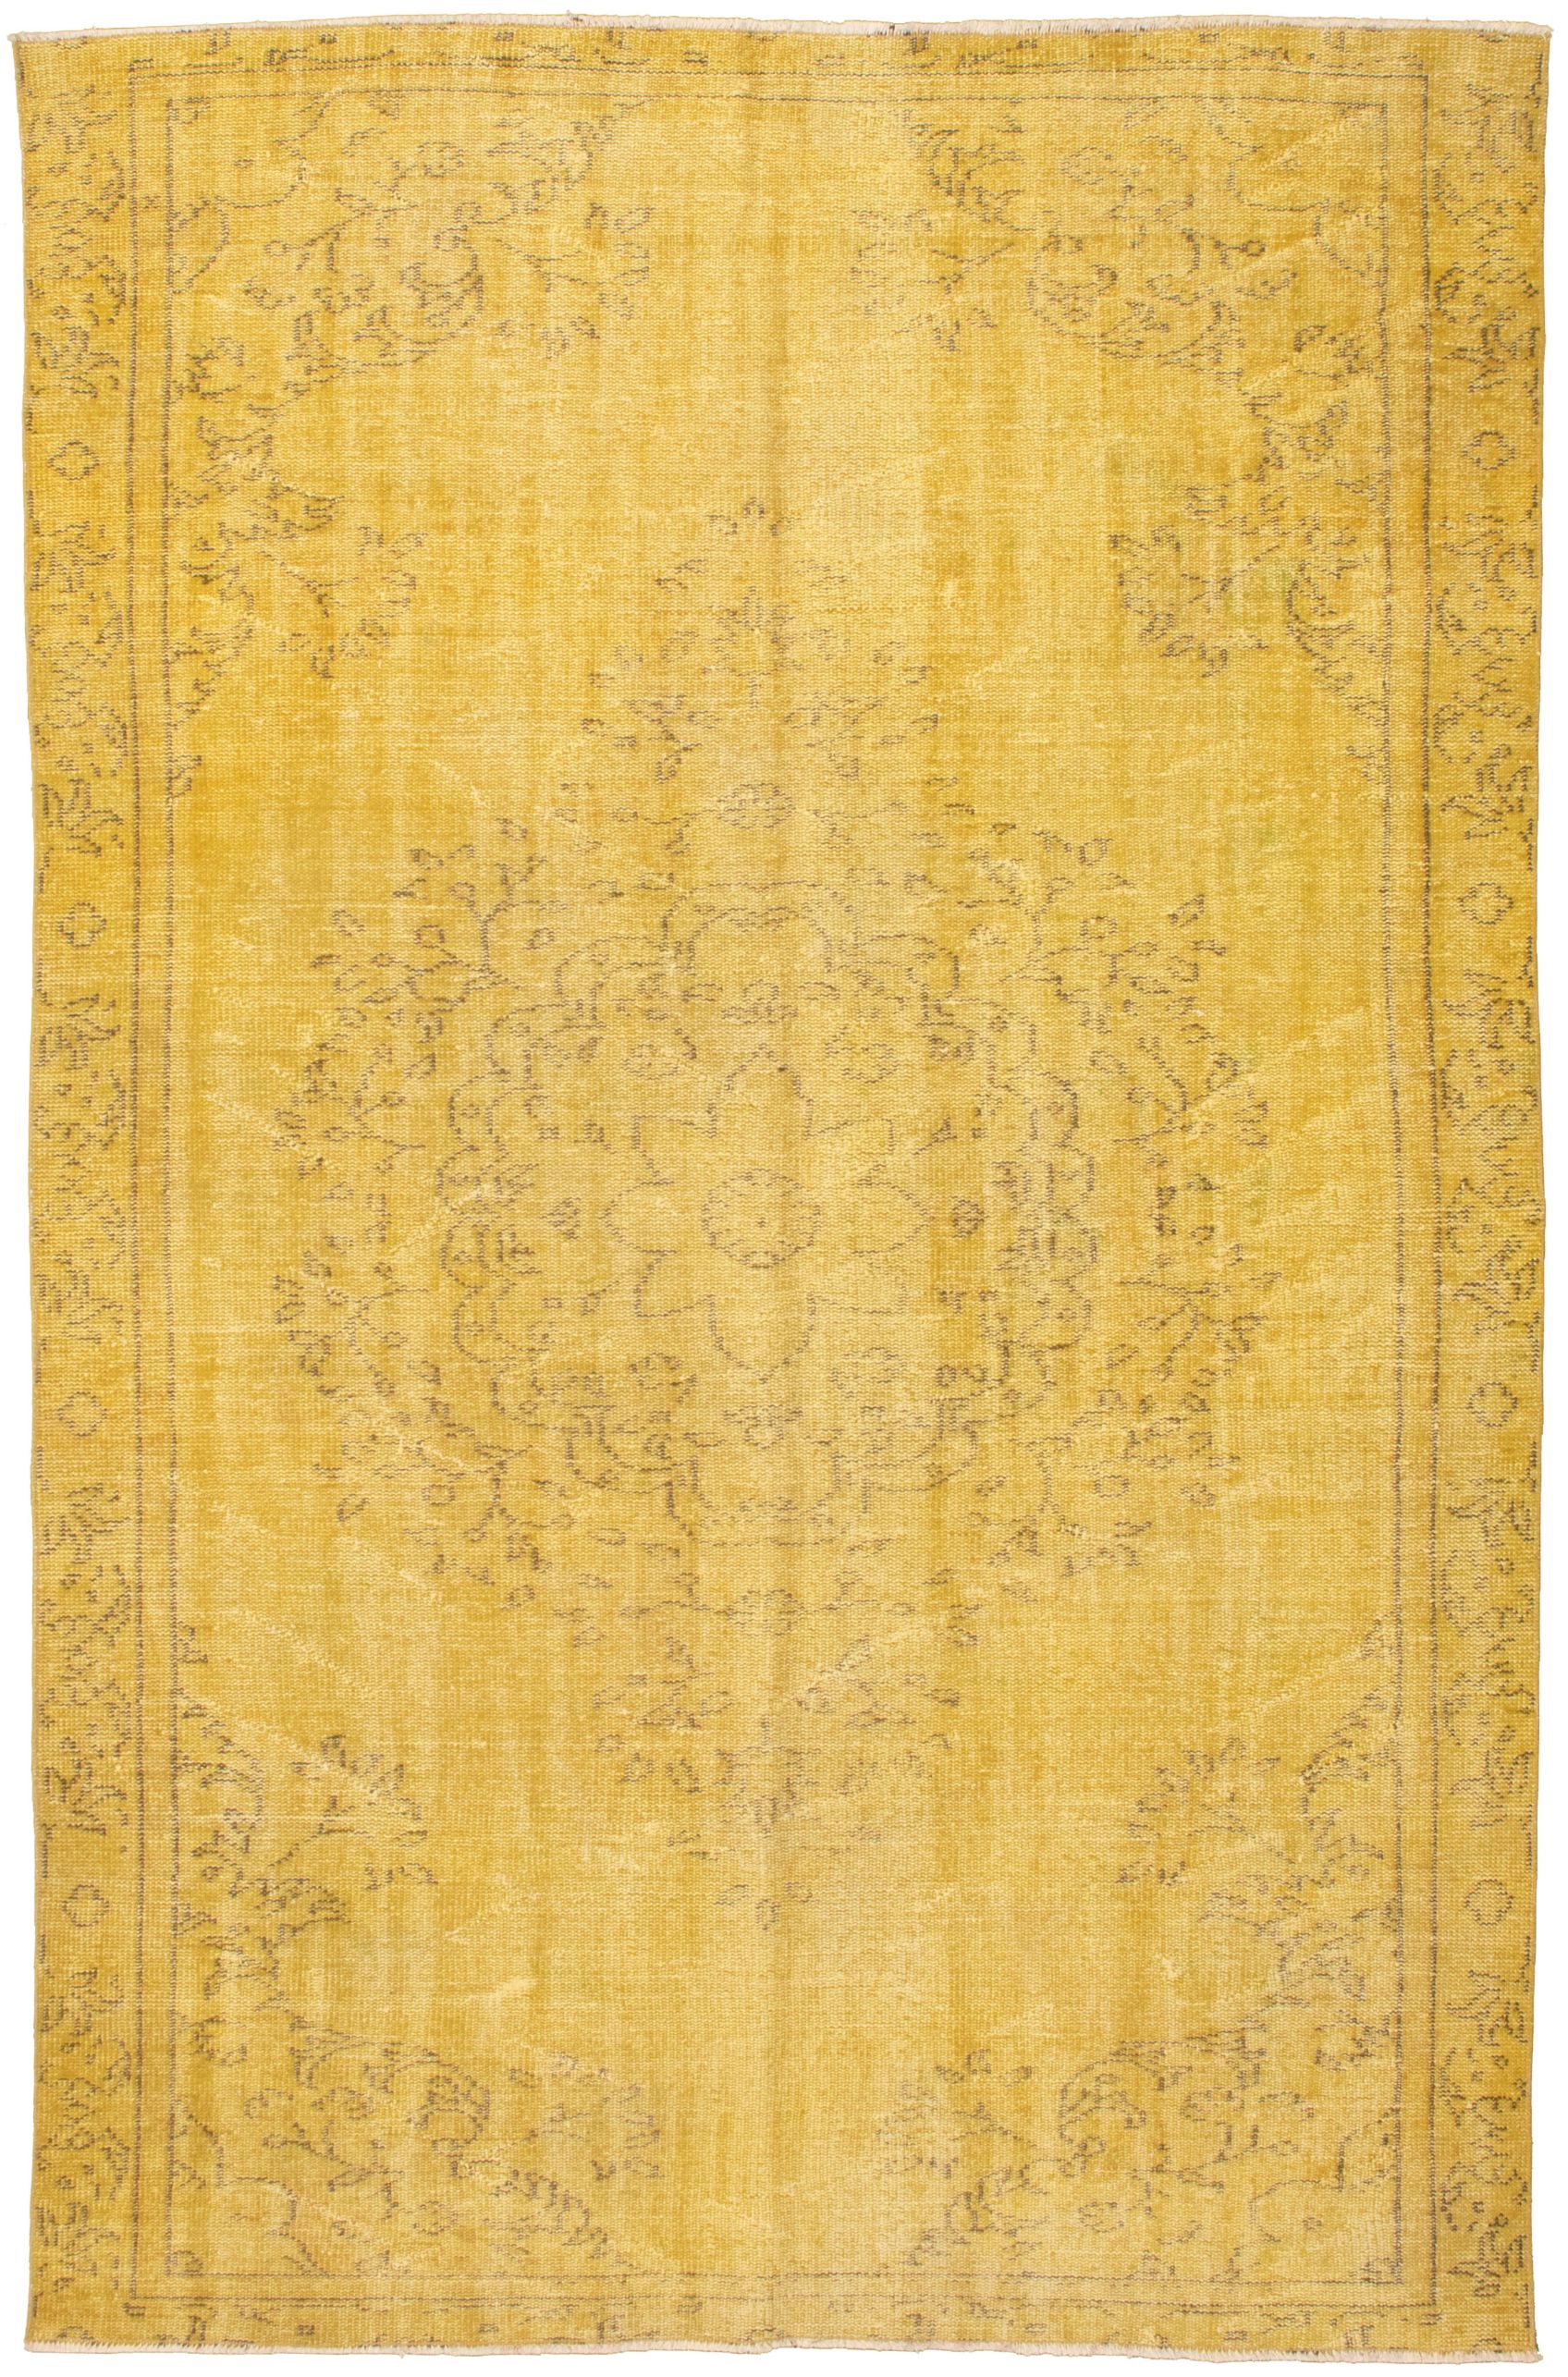 Hand-knotted Color Transition Gold Wool Rug 5'10" x 9'7" Size: 5'10" x 9'7"  